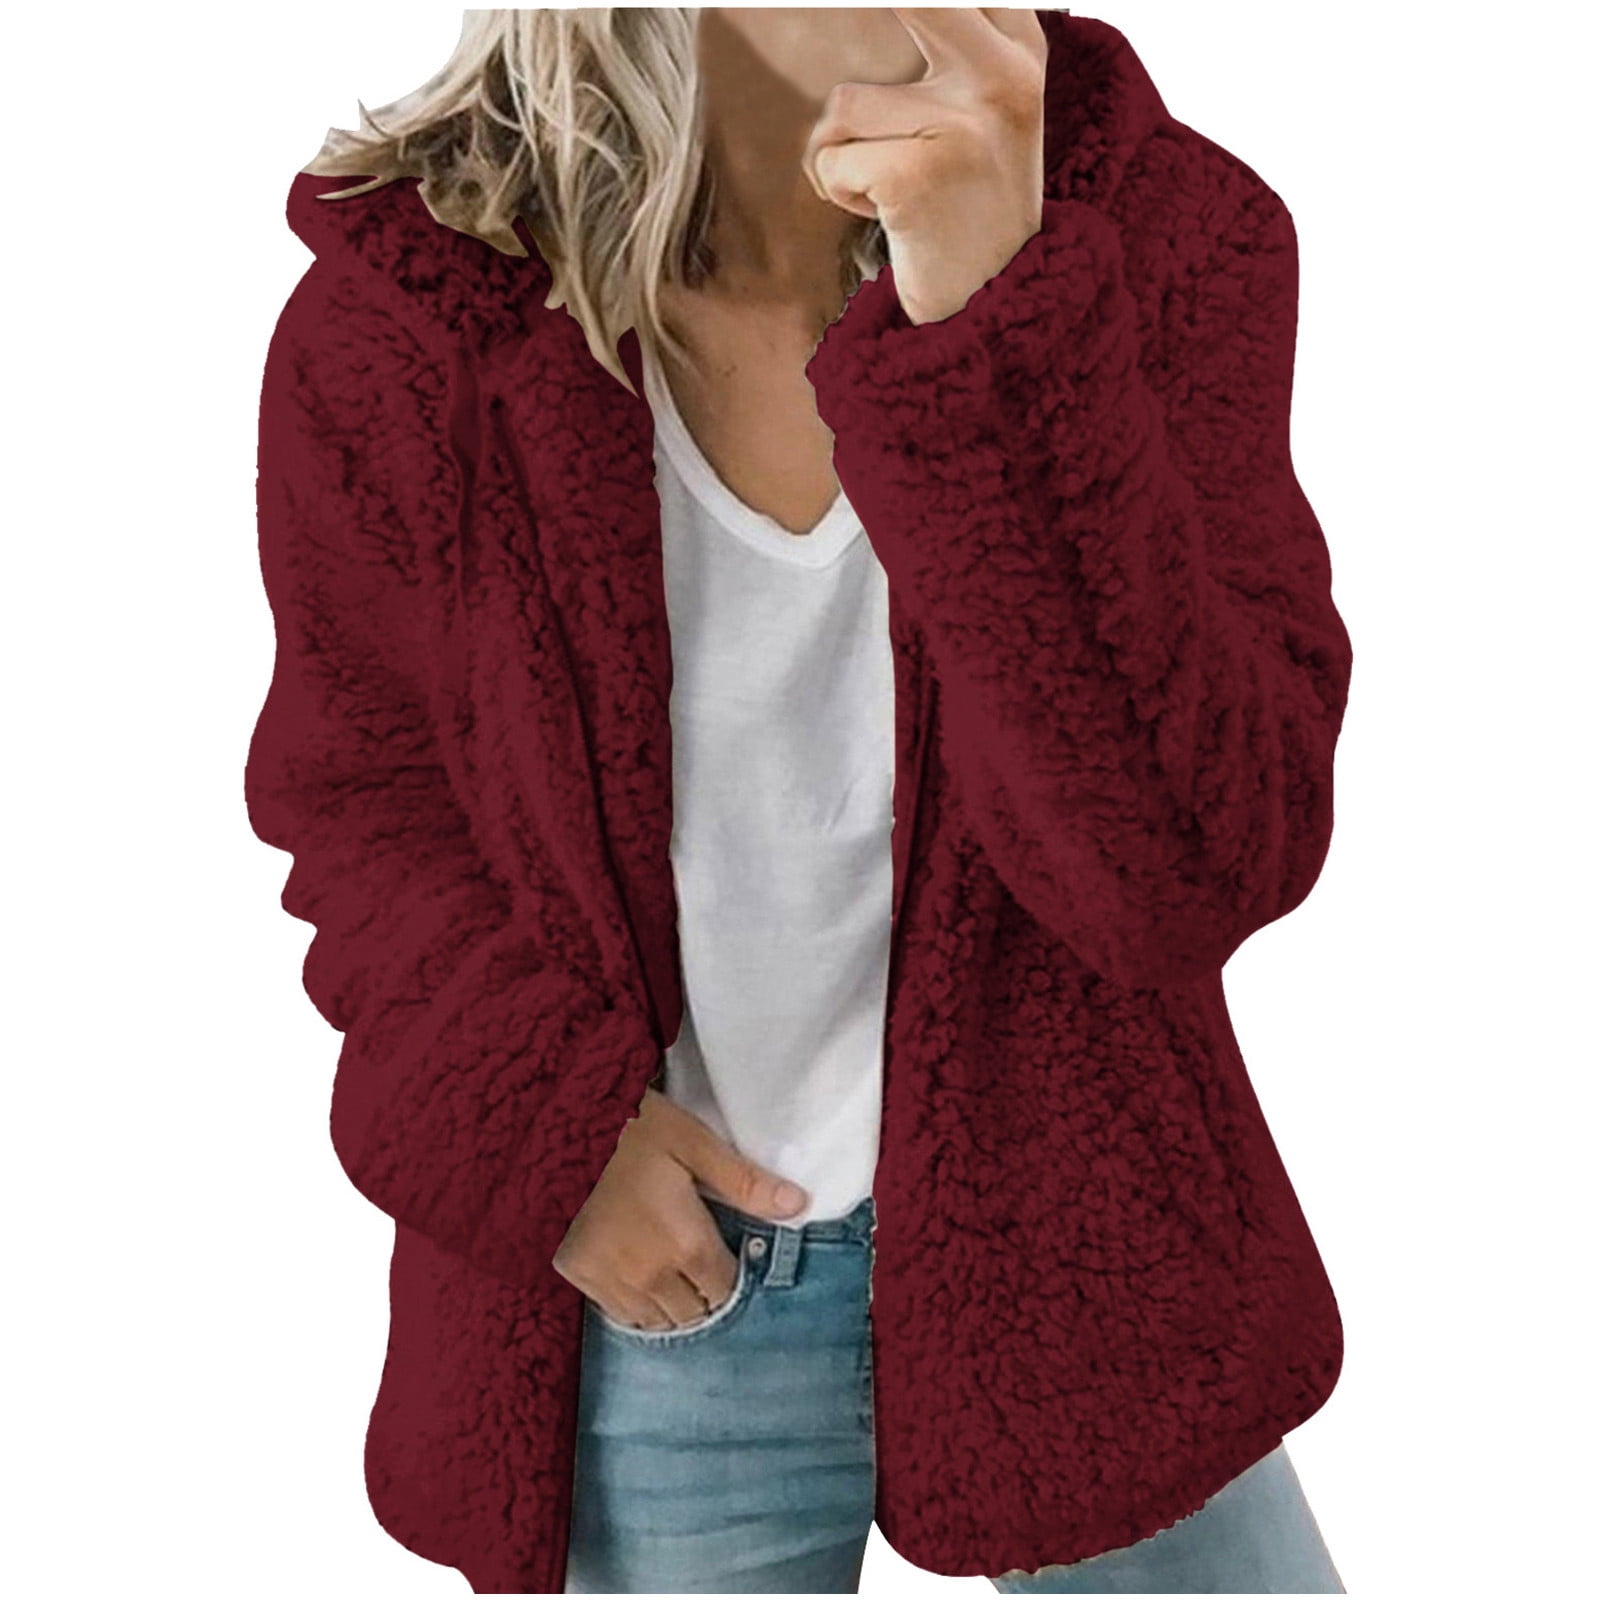 Plush Jackets for Women Solid Color Sherpa Jackets Warm Faux Fur Zip Up ...